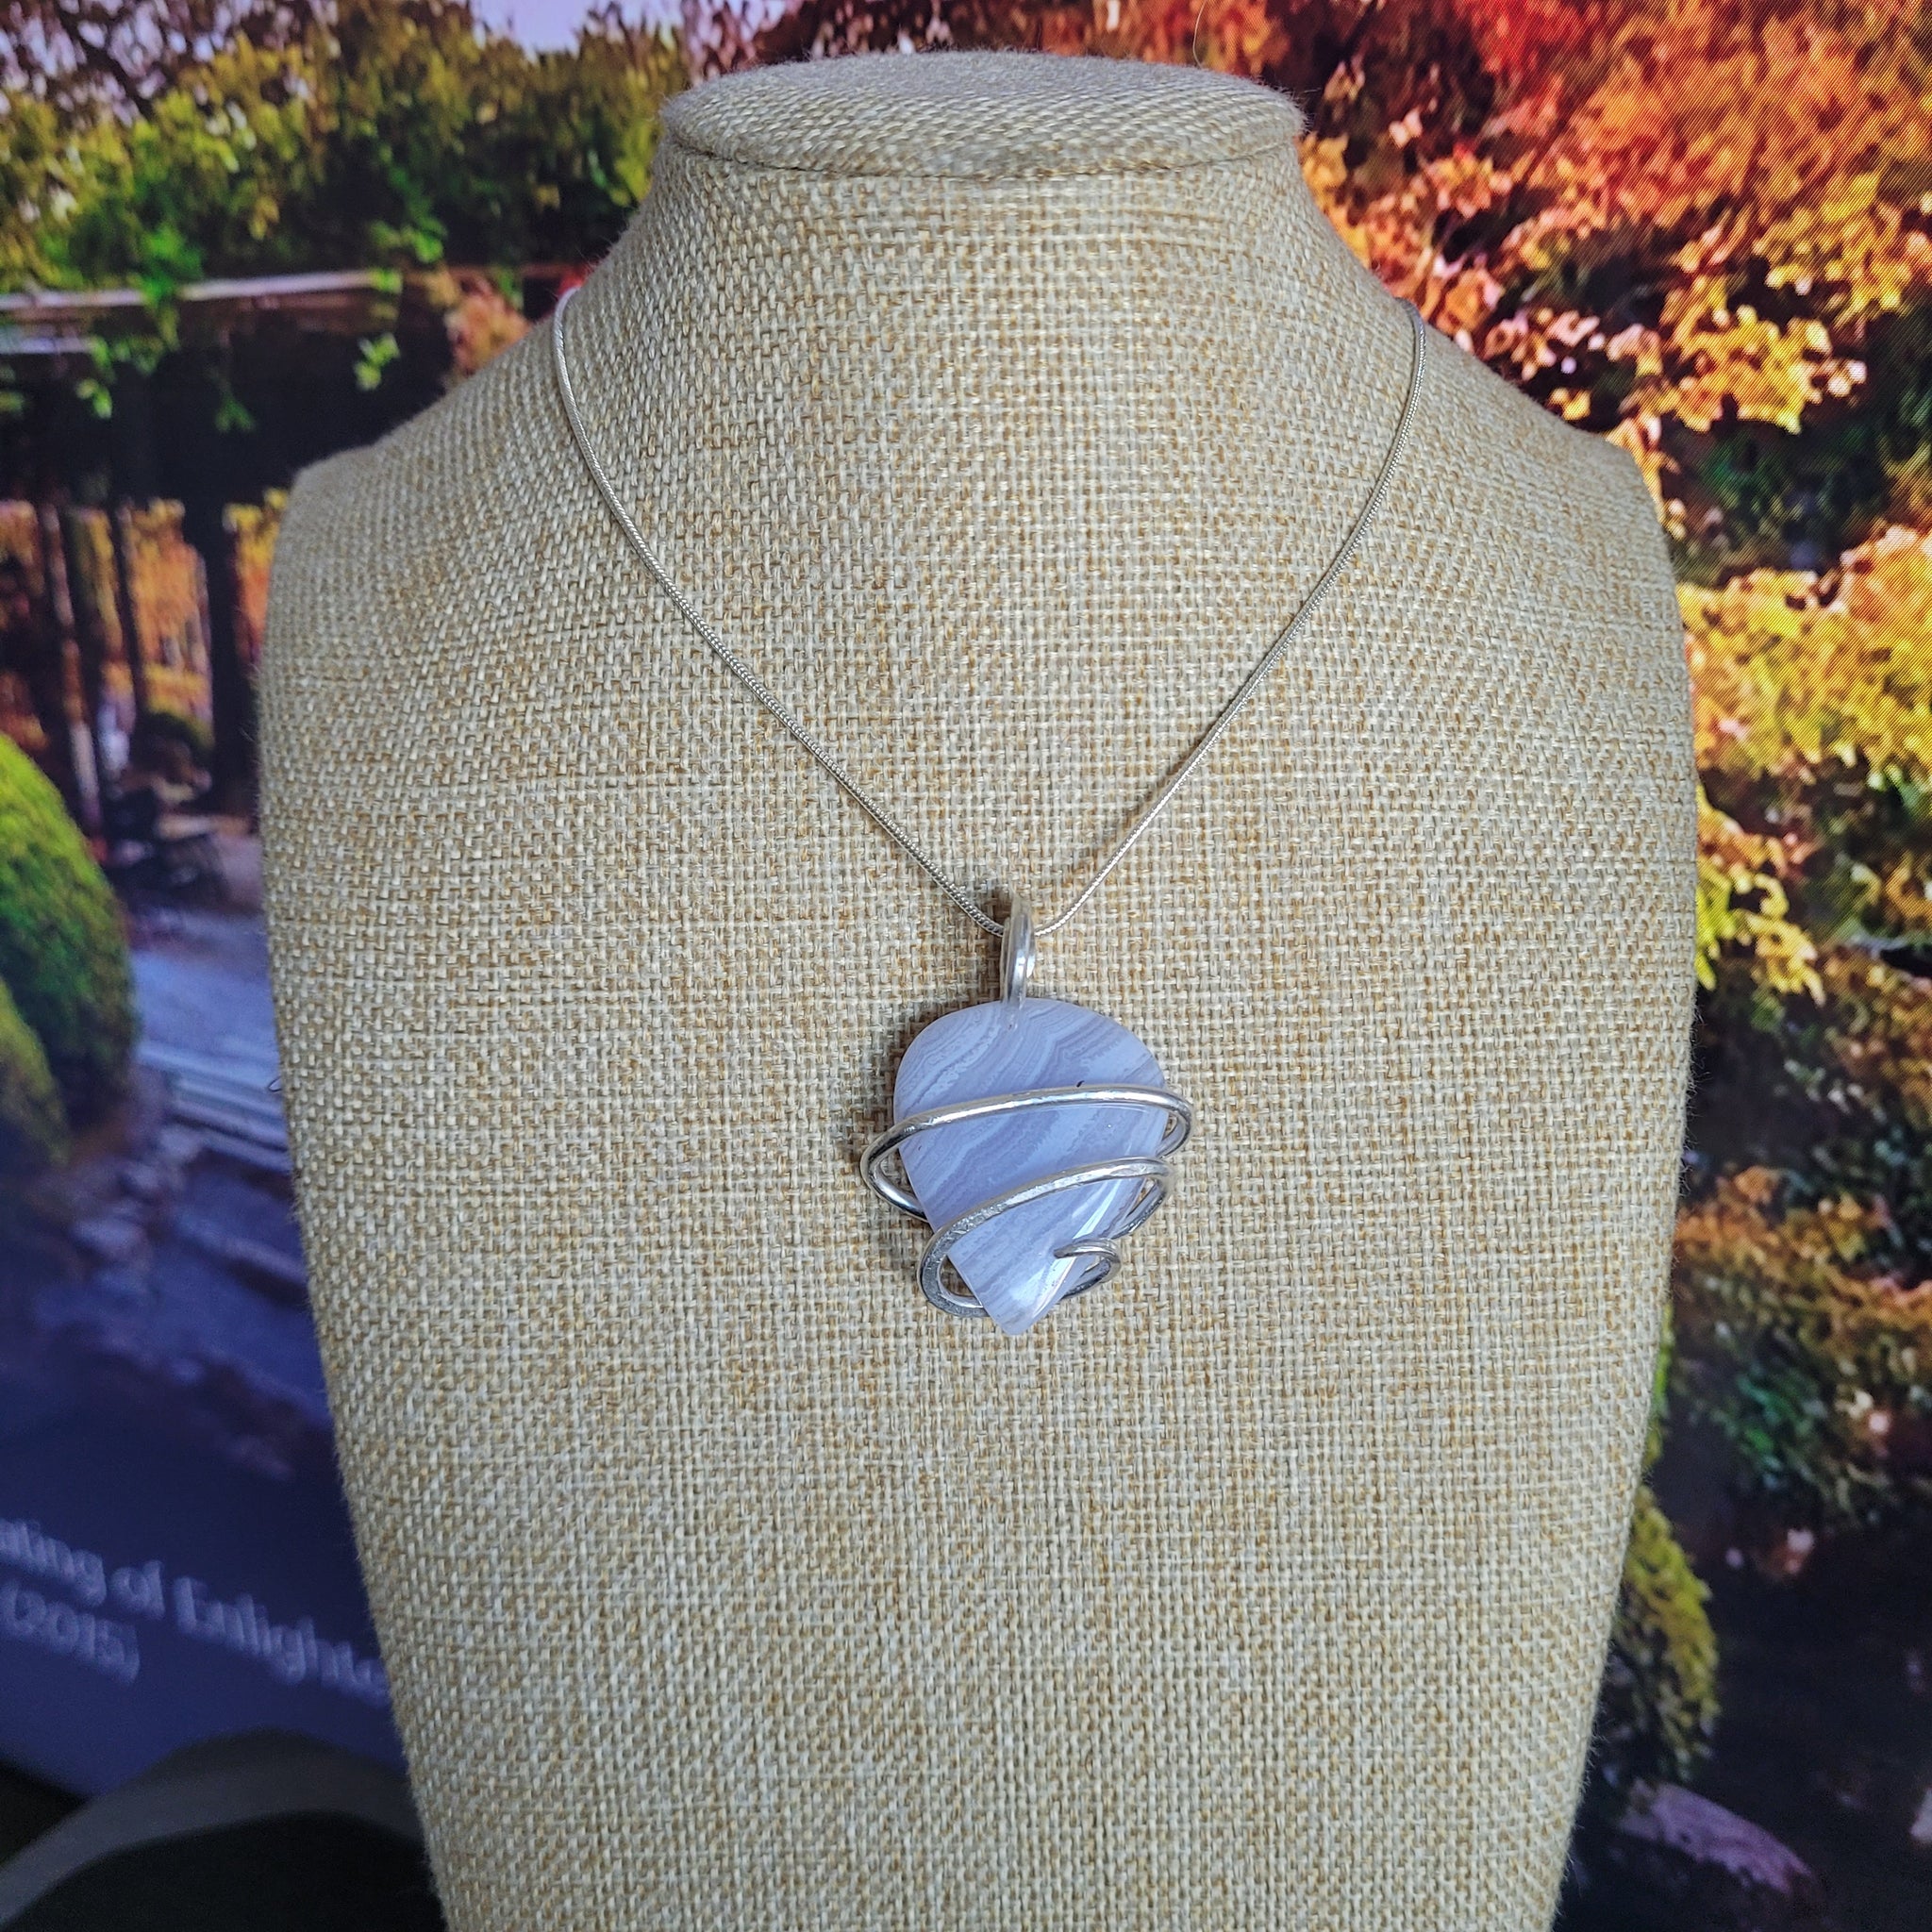 Blue Lace Agate & Sterling Silver Natural Stone Pendant